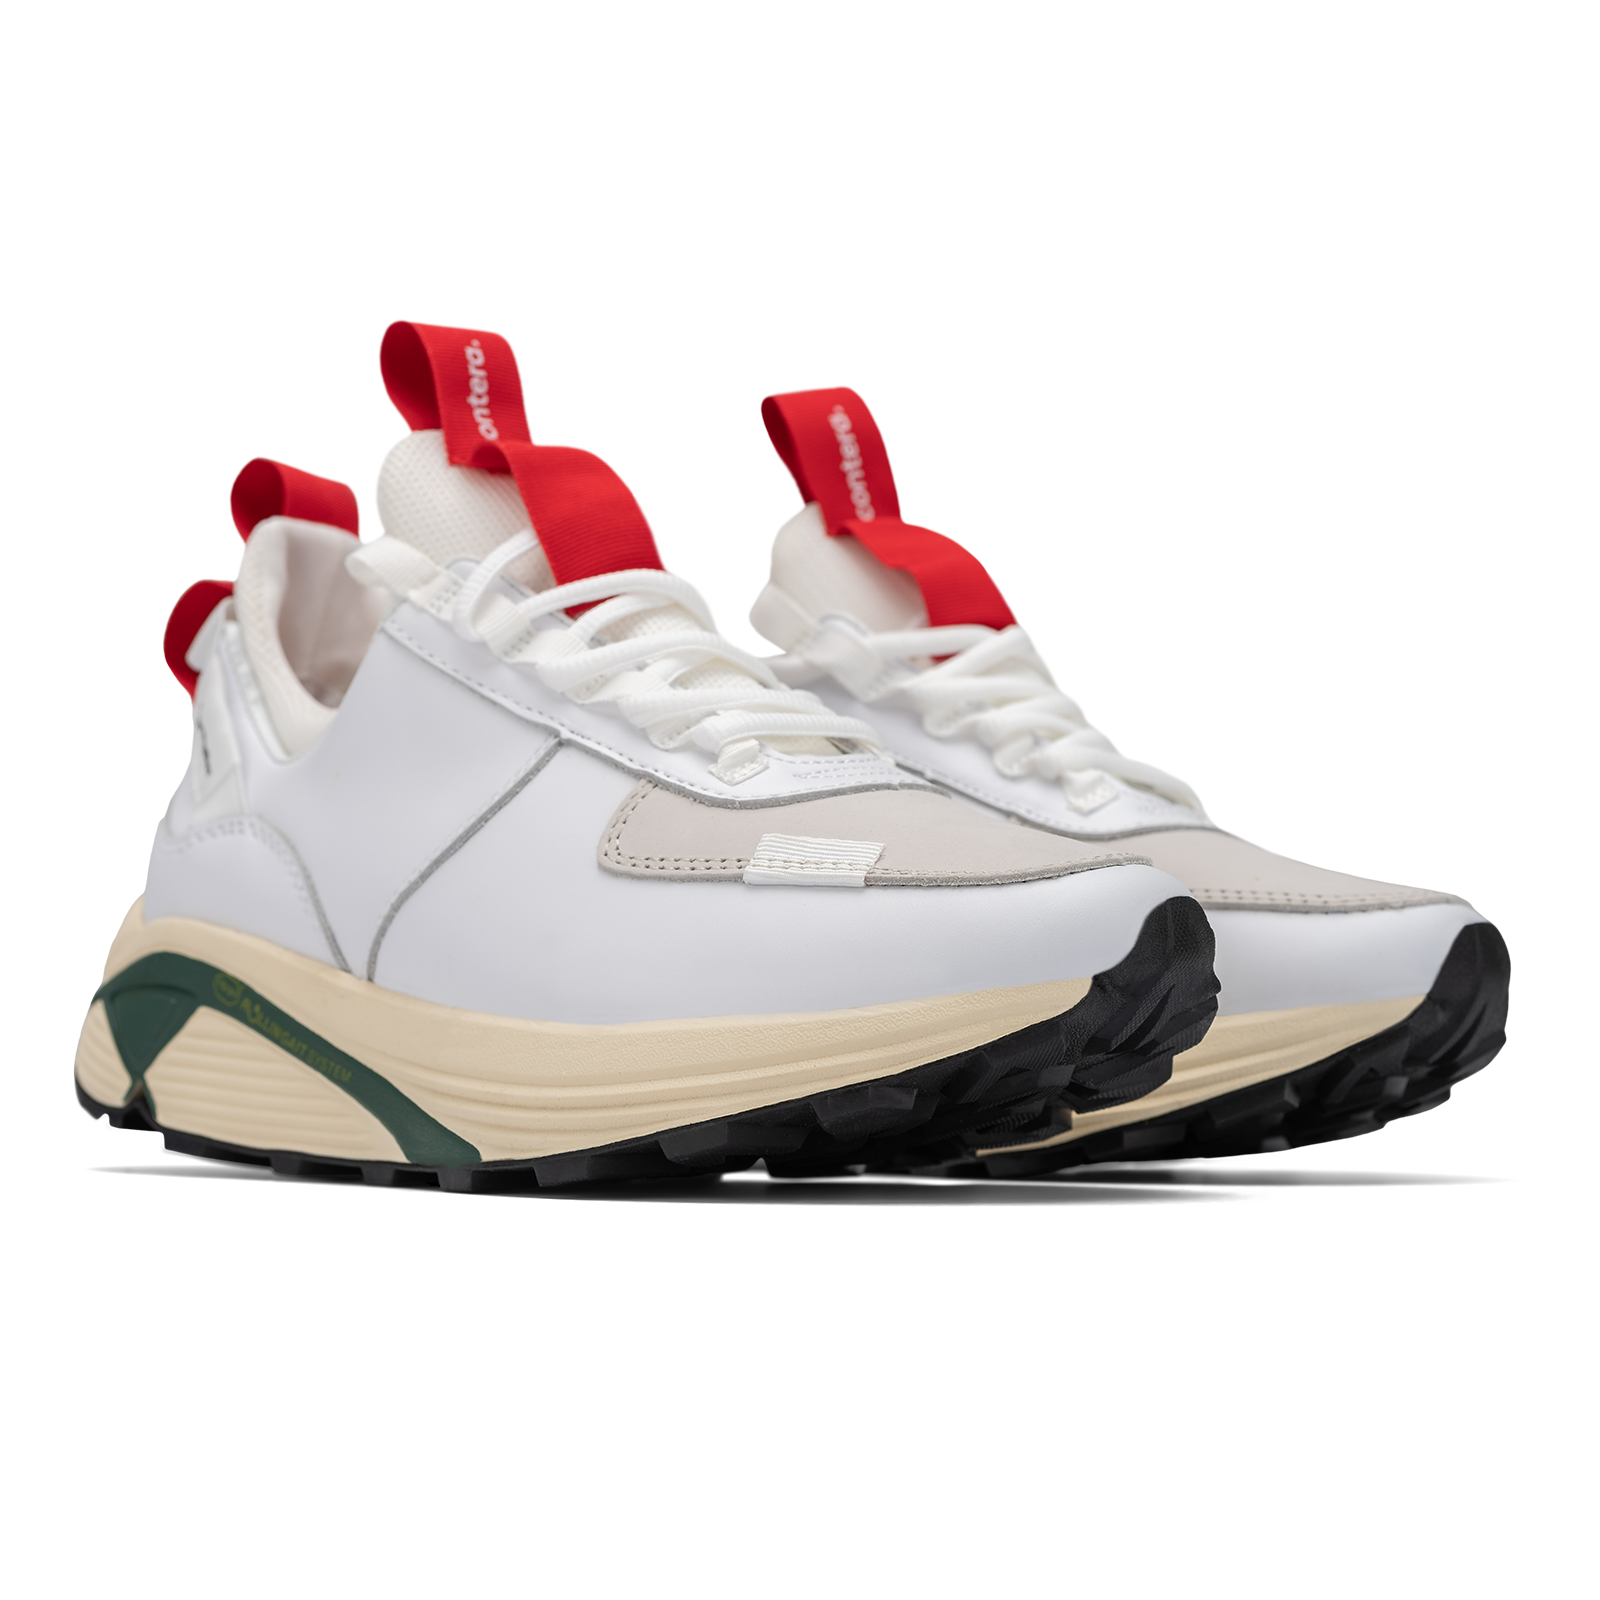 3/4 front view, Contera Cloud Forest is a runner with White fullgrain and Nubuck leather overlays White stretch mesh underlays, Red webbing heel and tongue pull, webbing lace system gream and green Virbam midsole and black vibram rubber outsole.